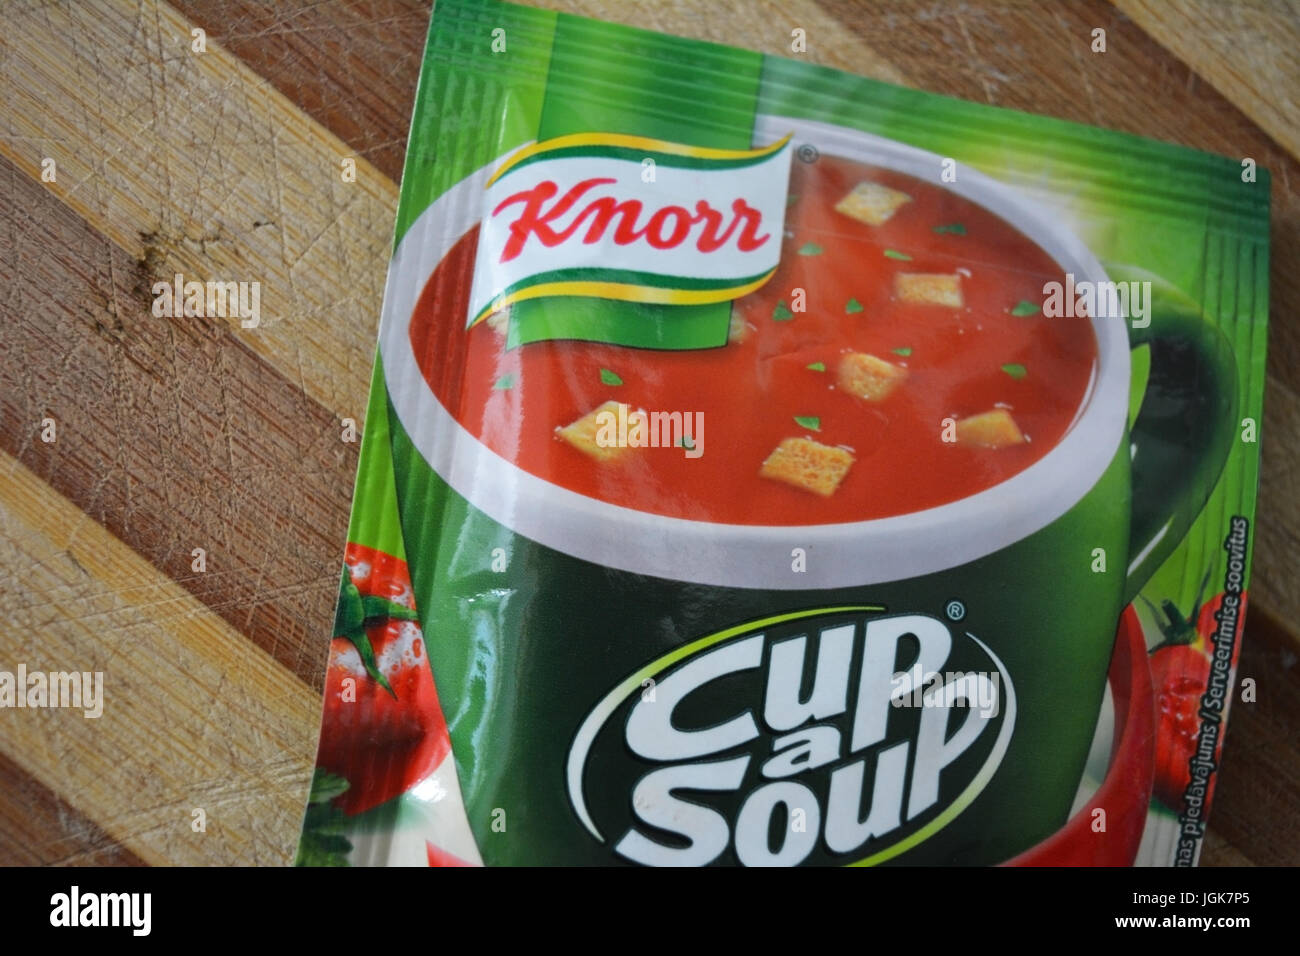 A knorr cup a soup isolated on a background Stock Photo